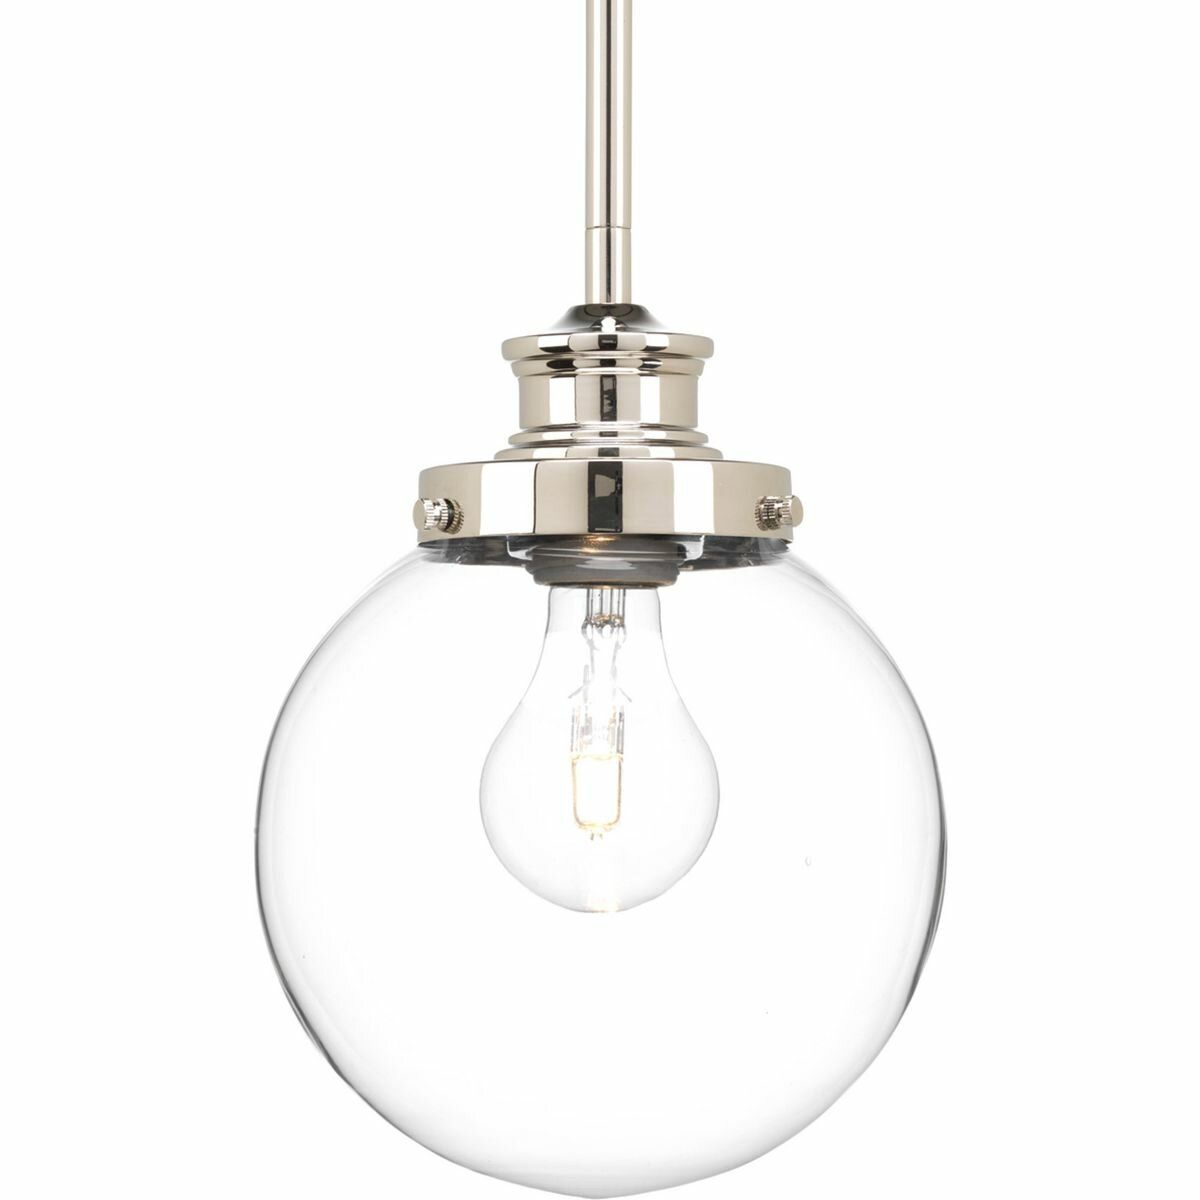 Cayden 1 Light Single Globe Pendant Intended For Finlayson Iron Gate 1 Light Single Bell Pendants (View 15 of 30)